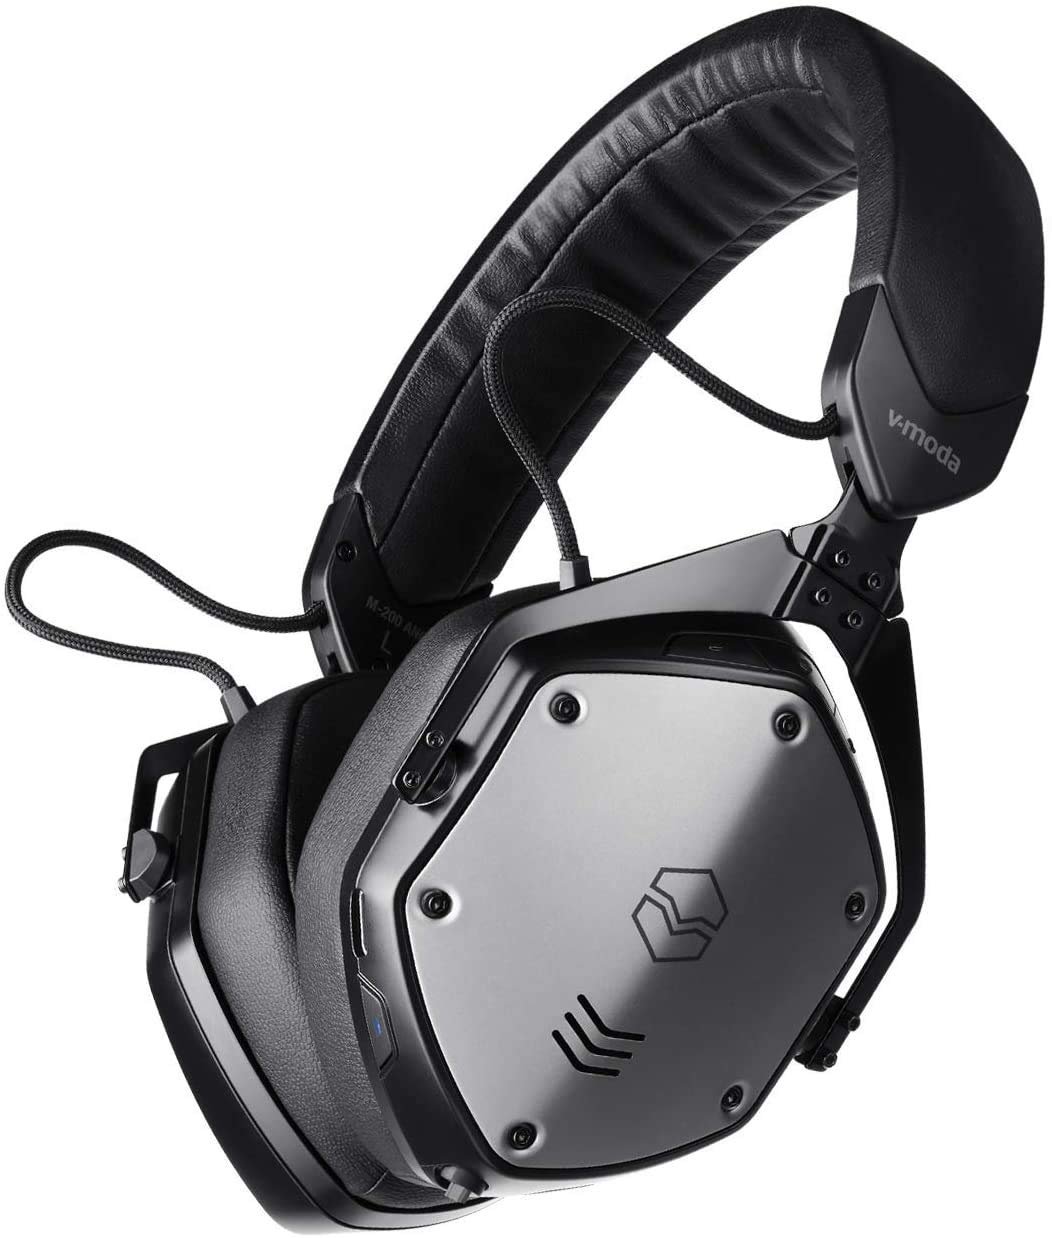 V-Moda M-200 Anc Noise Cancelling Wireless Bluetooth Over-Ear Headphones